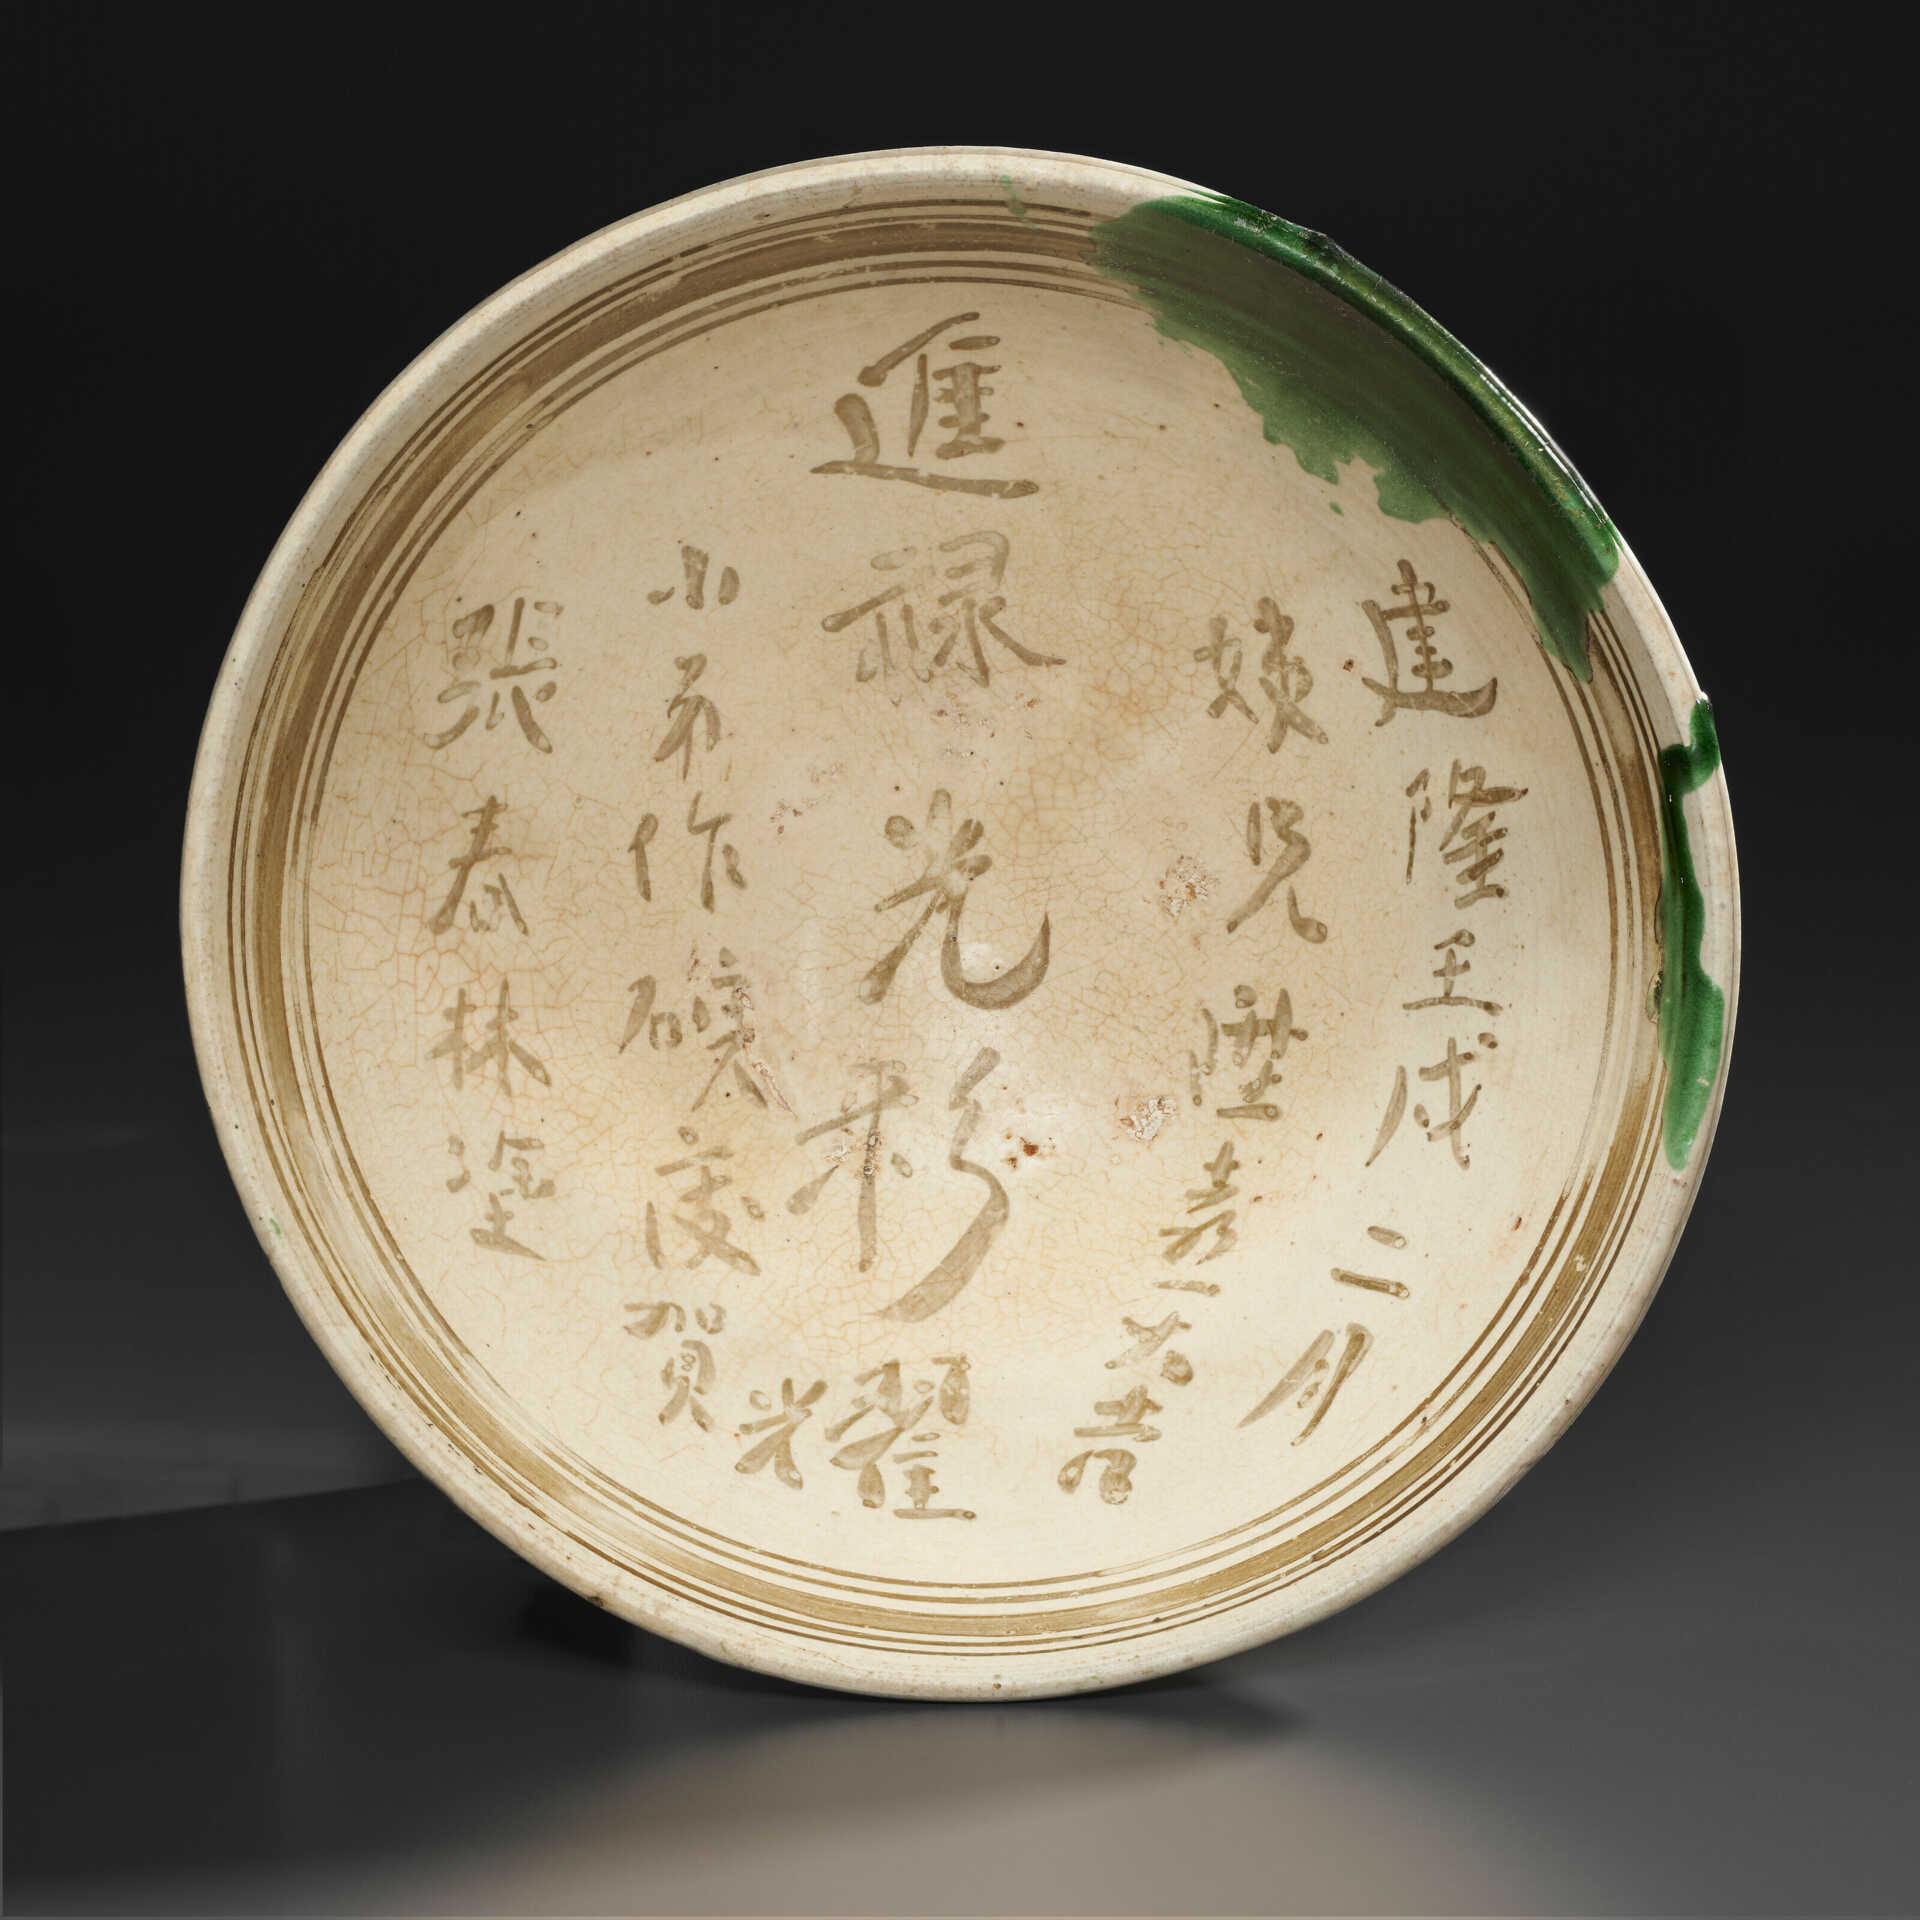 A RARE CARVED CIZHOU BOWL WITH DATED INSCRIPTION